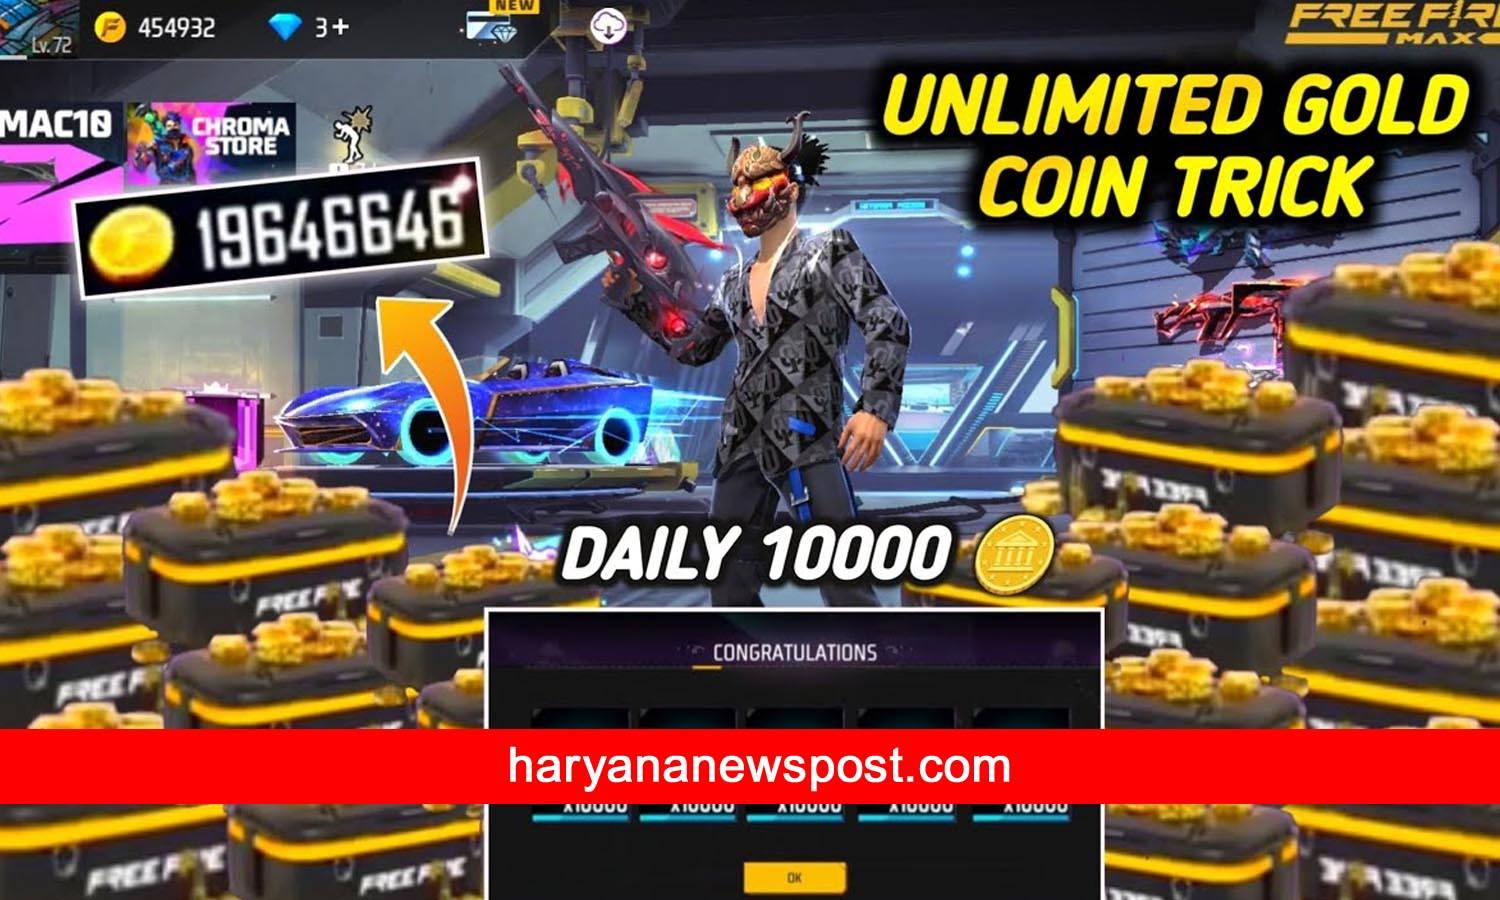 FF MAX's GET 10,000 GOLD COINS DAILY  FF MAX UNLIMITED GOLD COINS TRICK - GARENA FREE FIRE